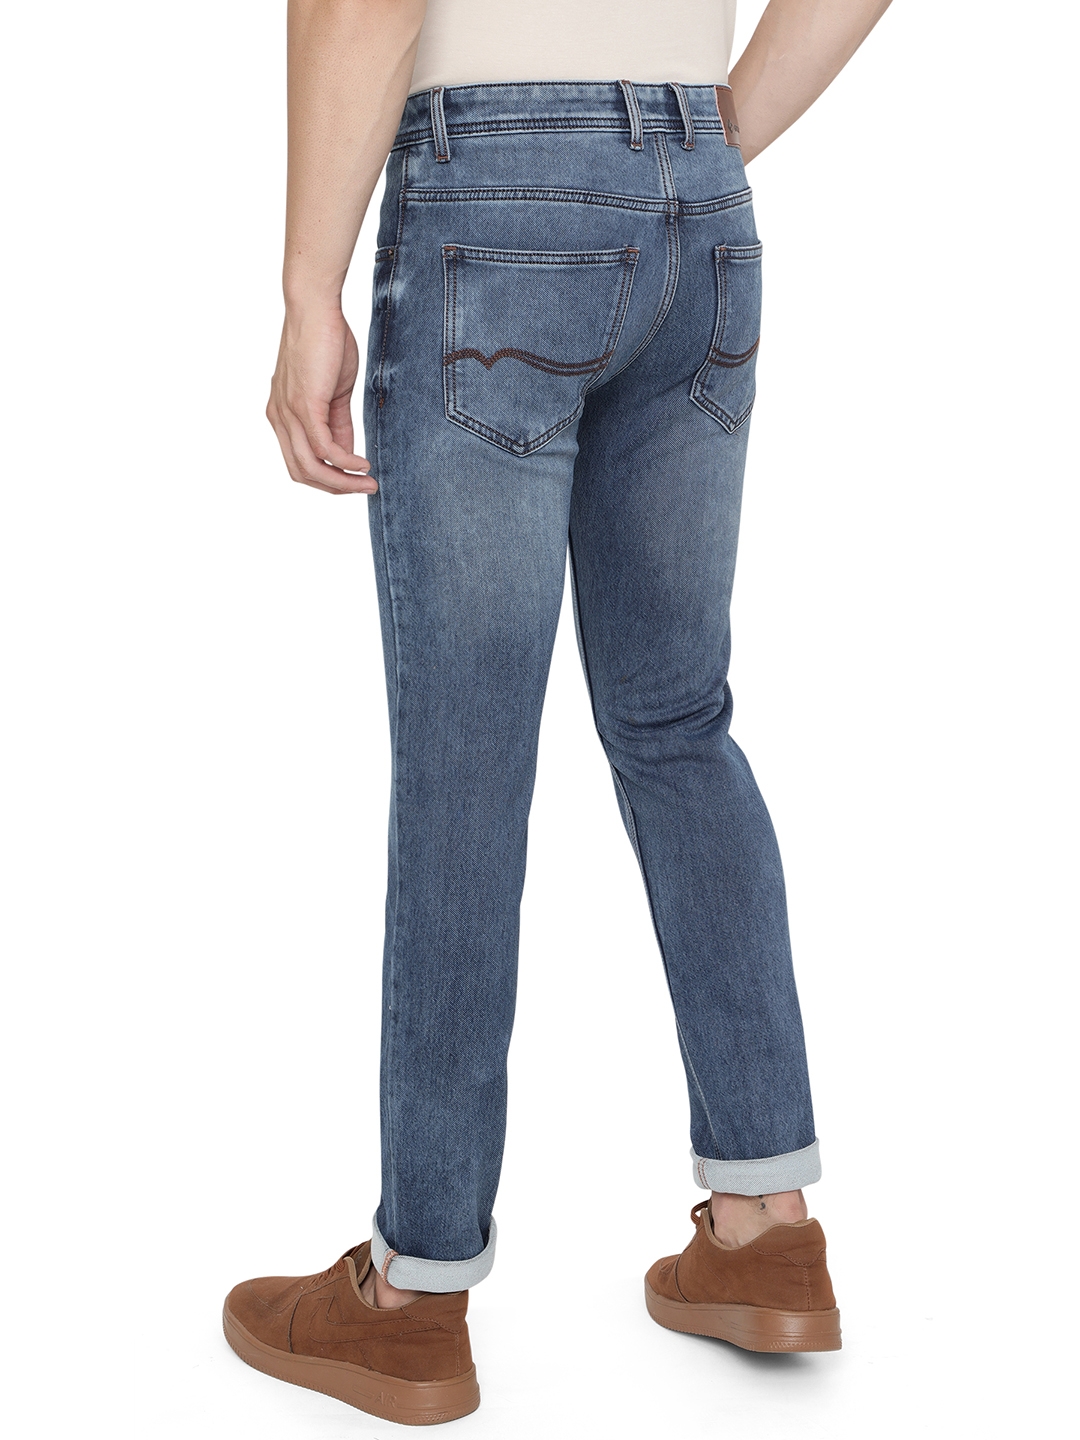 Greenfibre | Ink Blue Washed Narrow Fit Jeans | Greenfibre 2